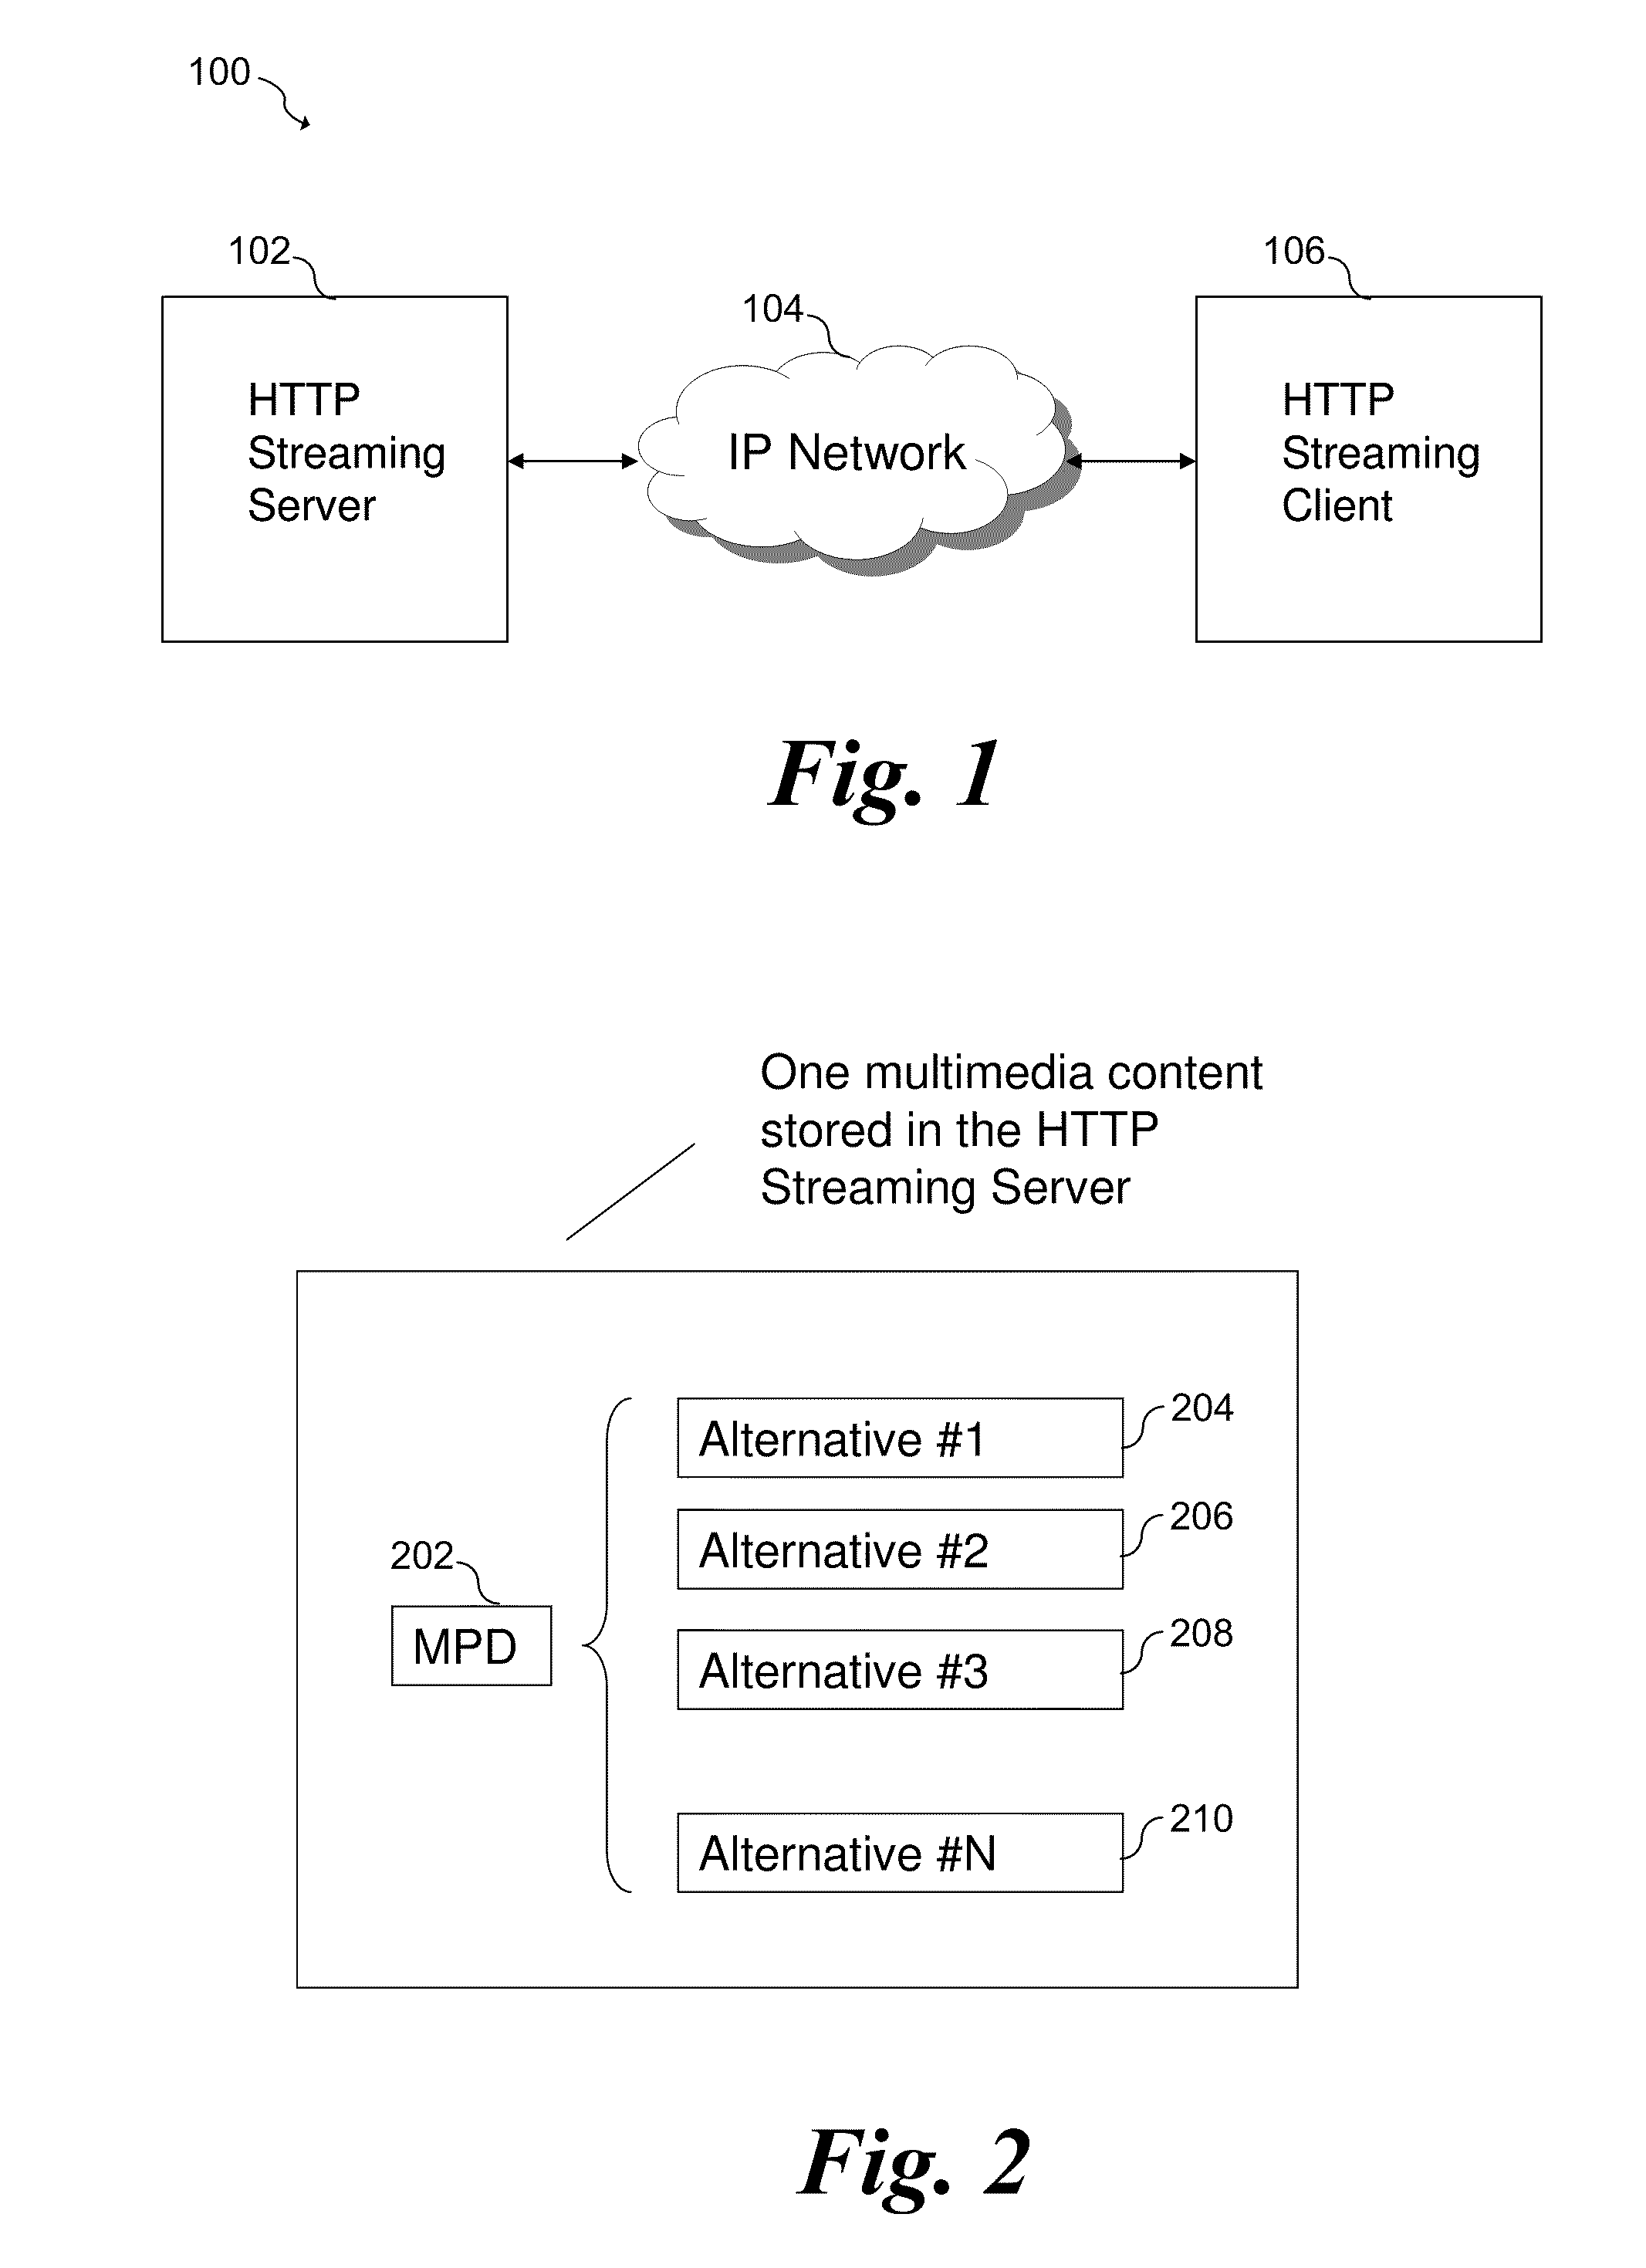 System and Method for Media Content Streaming